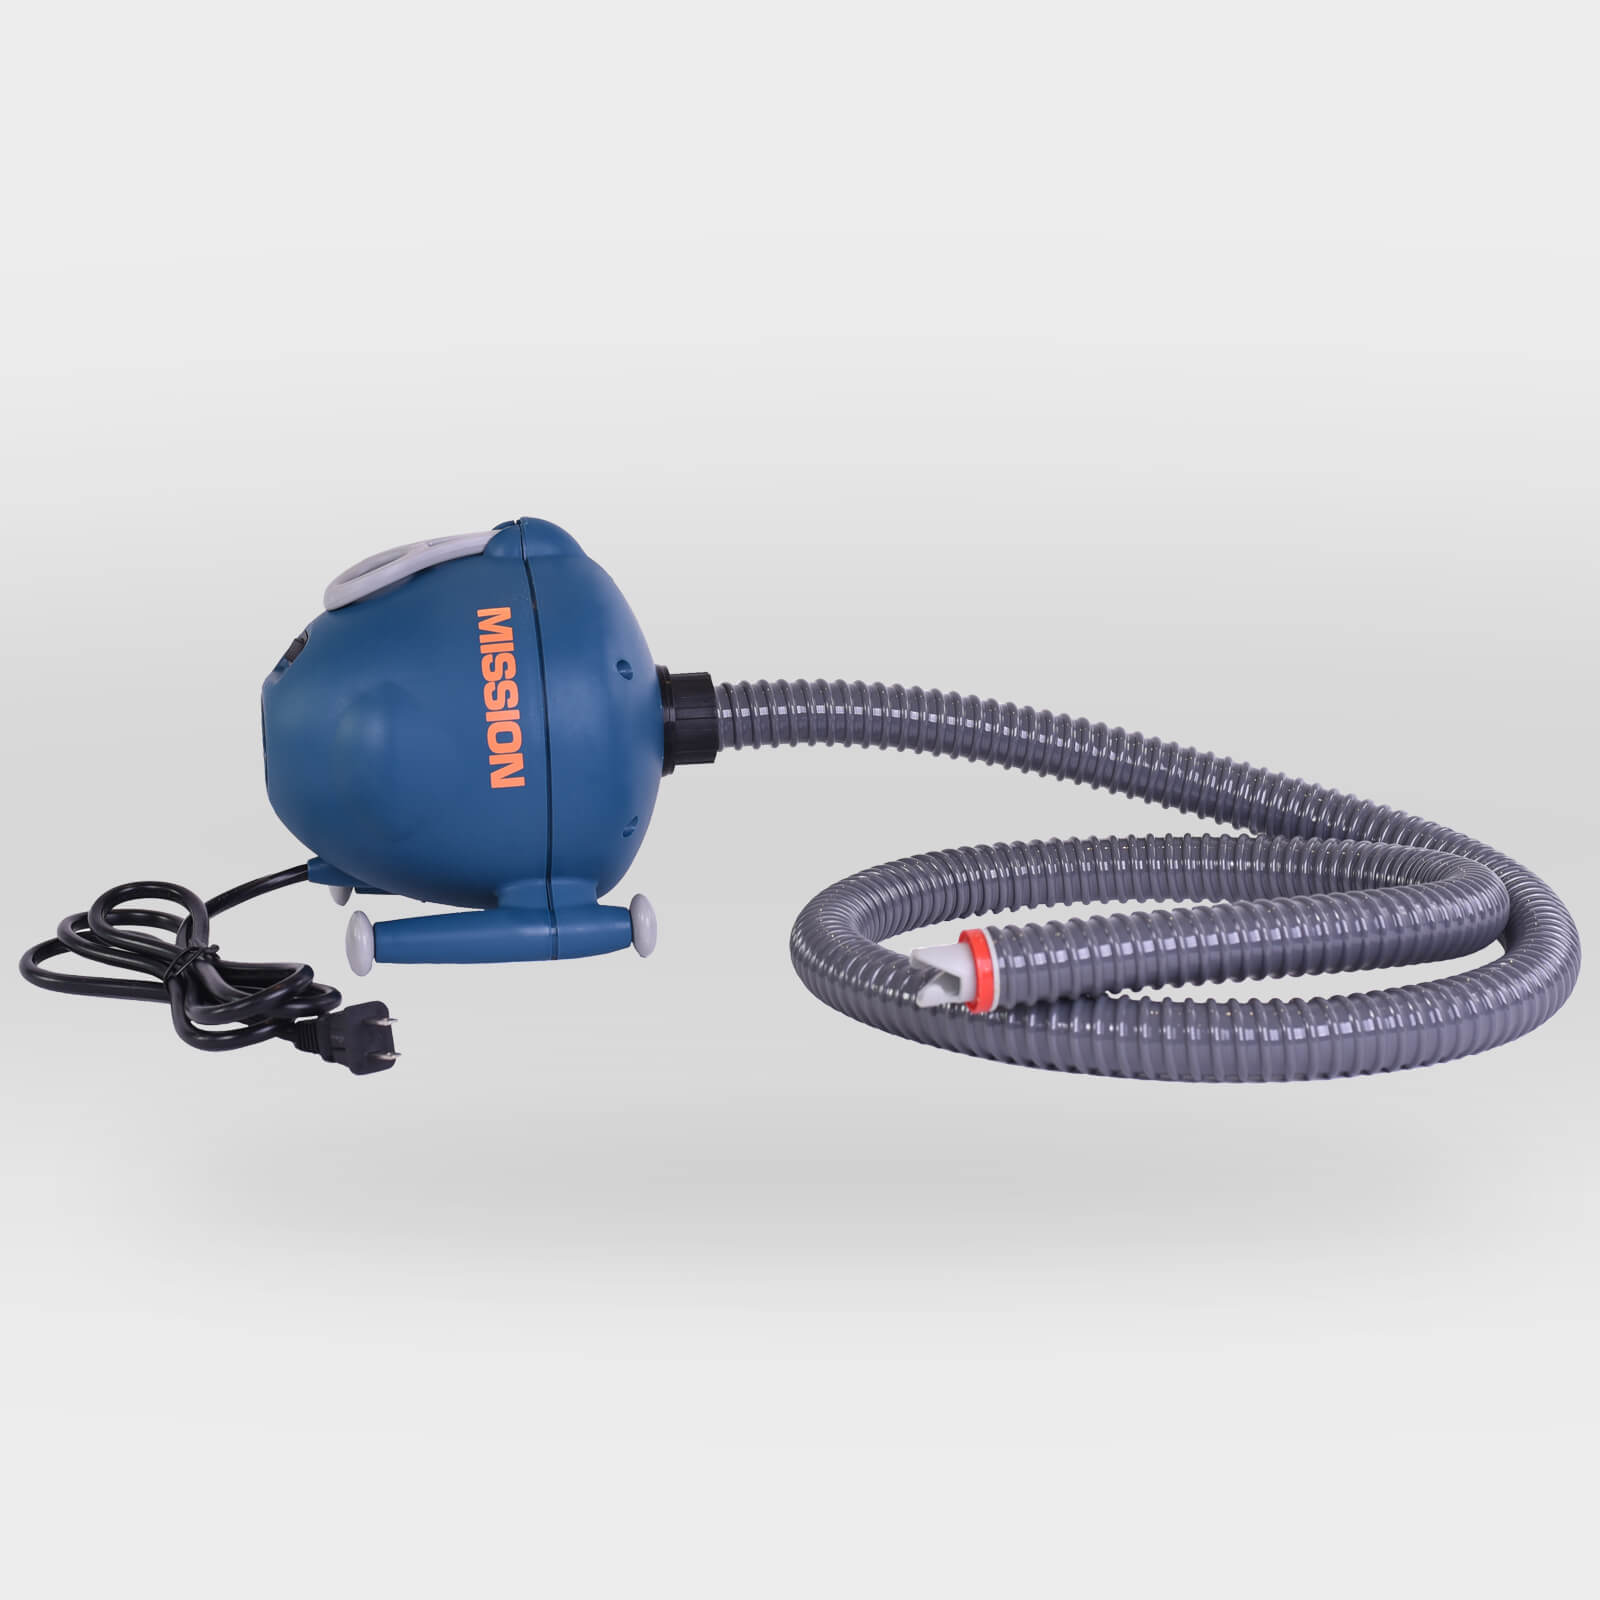 120v high volume air pump from MISSION